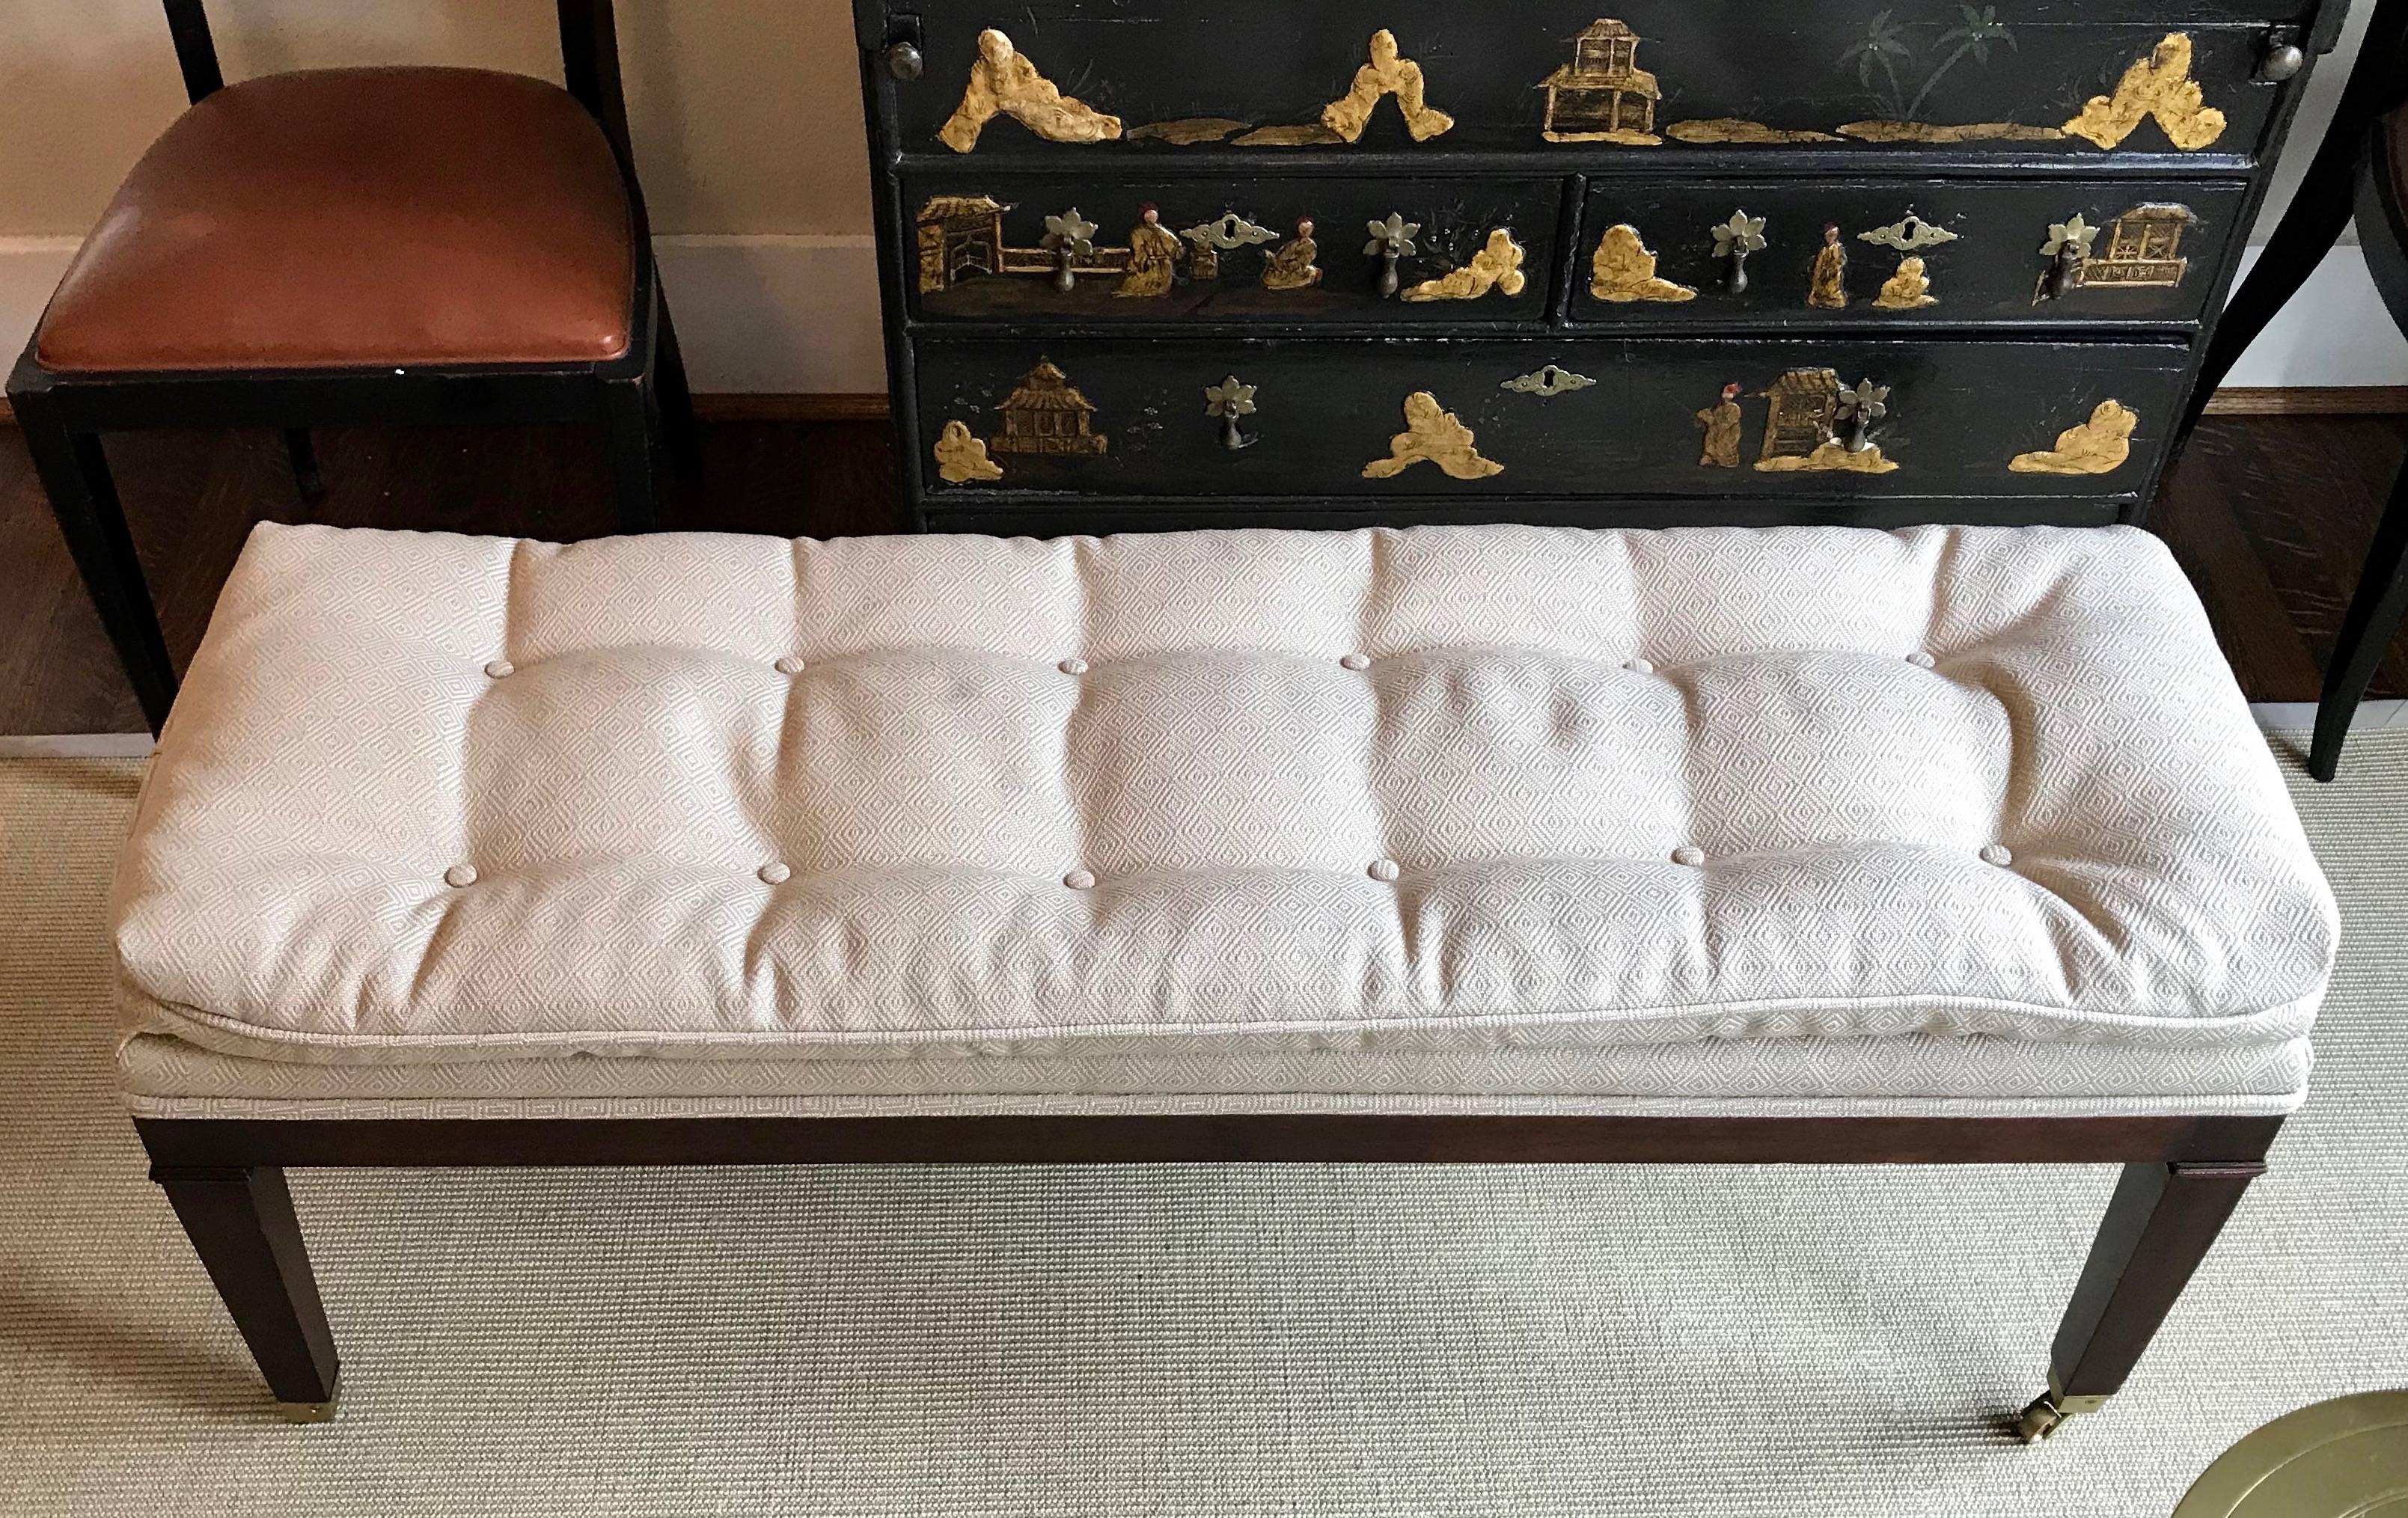 Long upholstered solid mahogany wood bench with brass casters and wheels. Perfect scale for foot of a king or queen size bed or entry or hallway. Very clean and handsome design that can move between traditional and transitional spaces. Frame is in